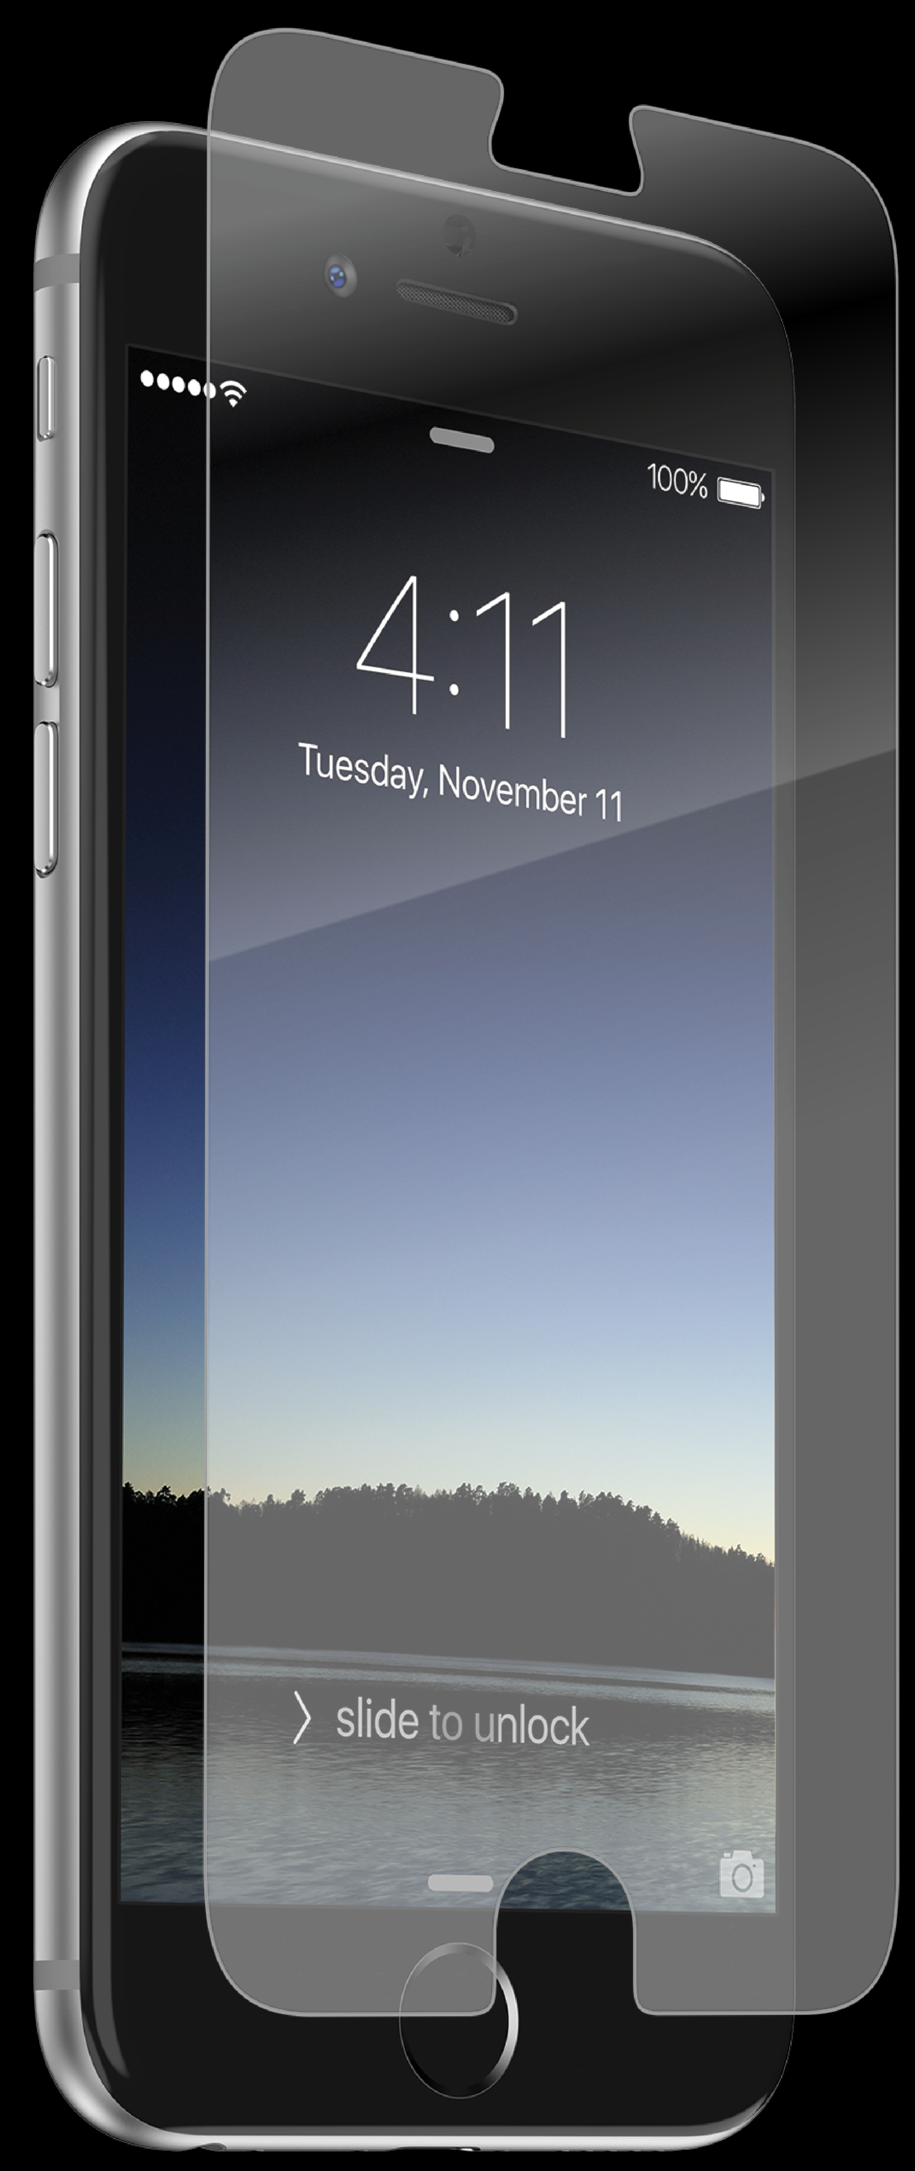 InvisibleShield Glass+ for iPhone 7, $39.99